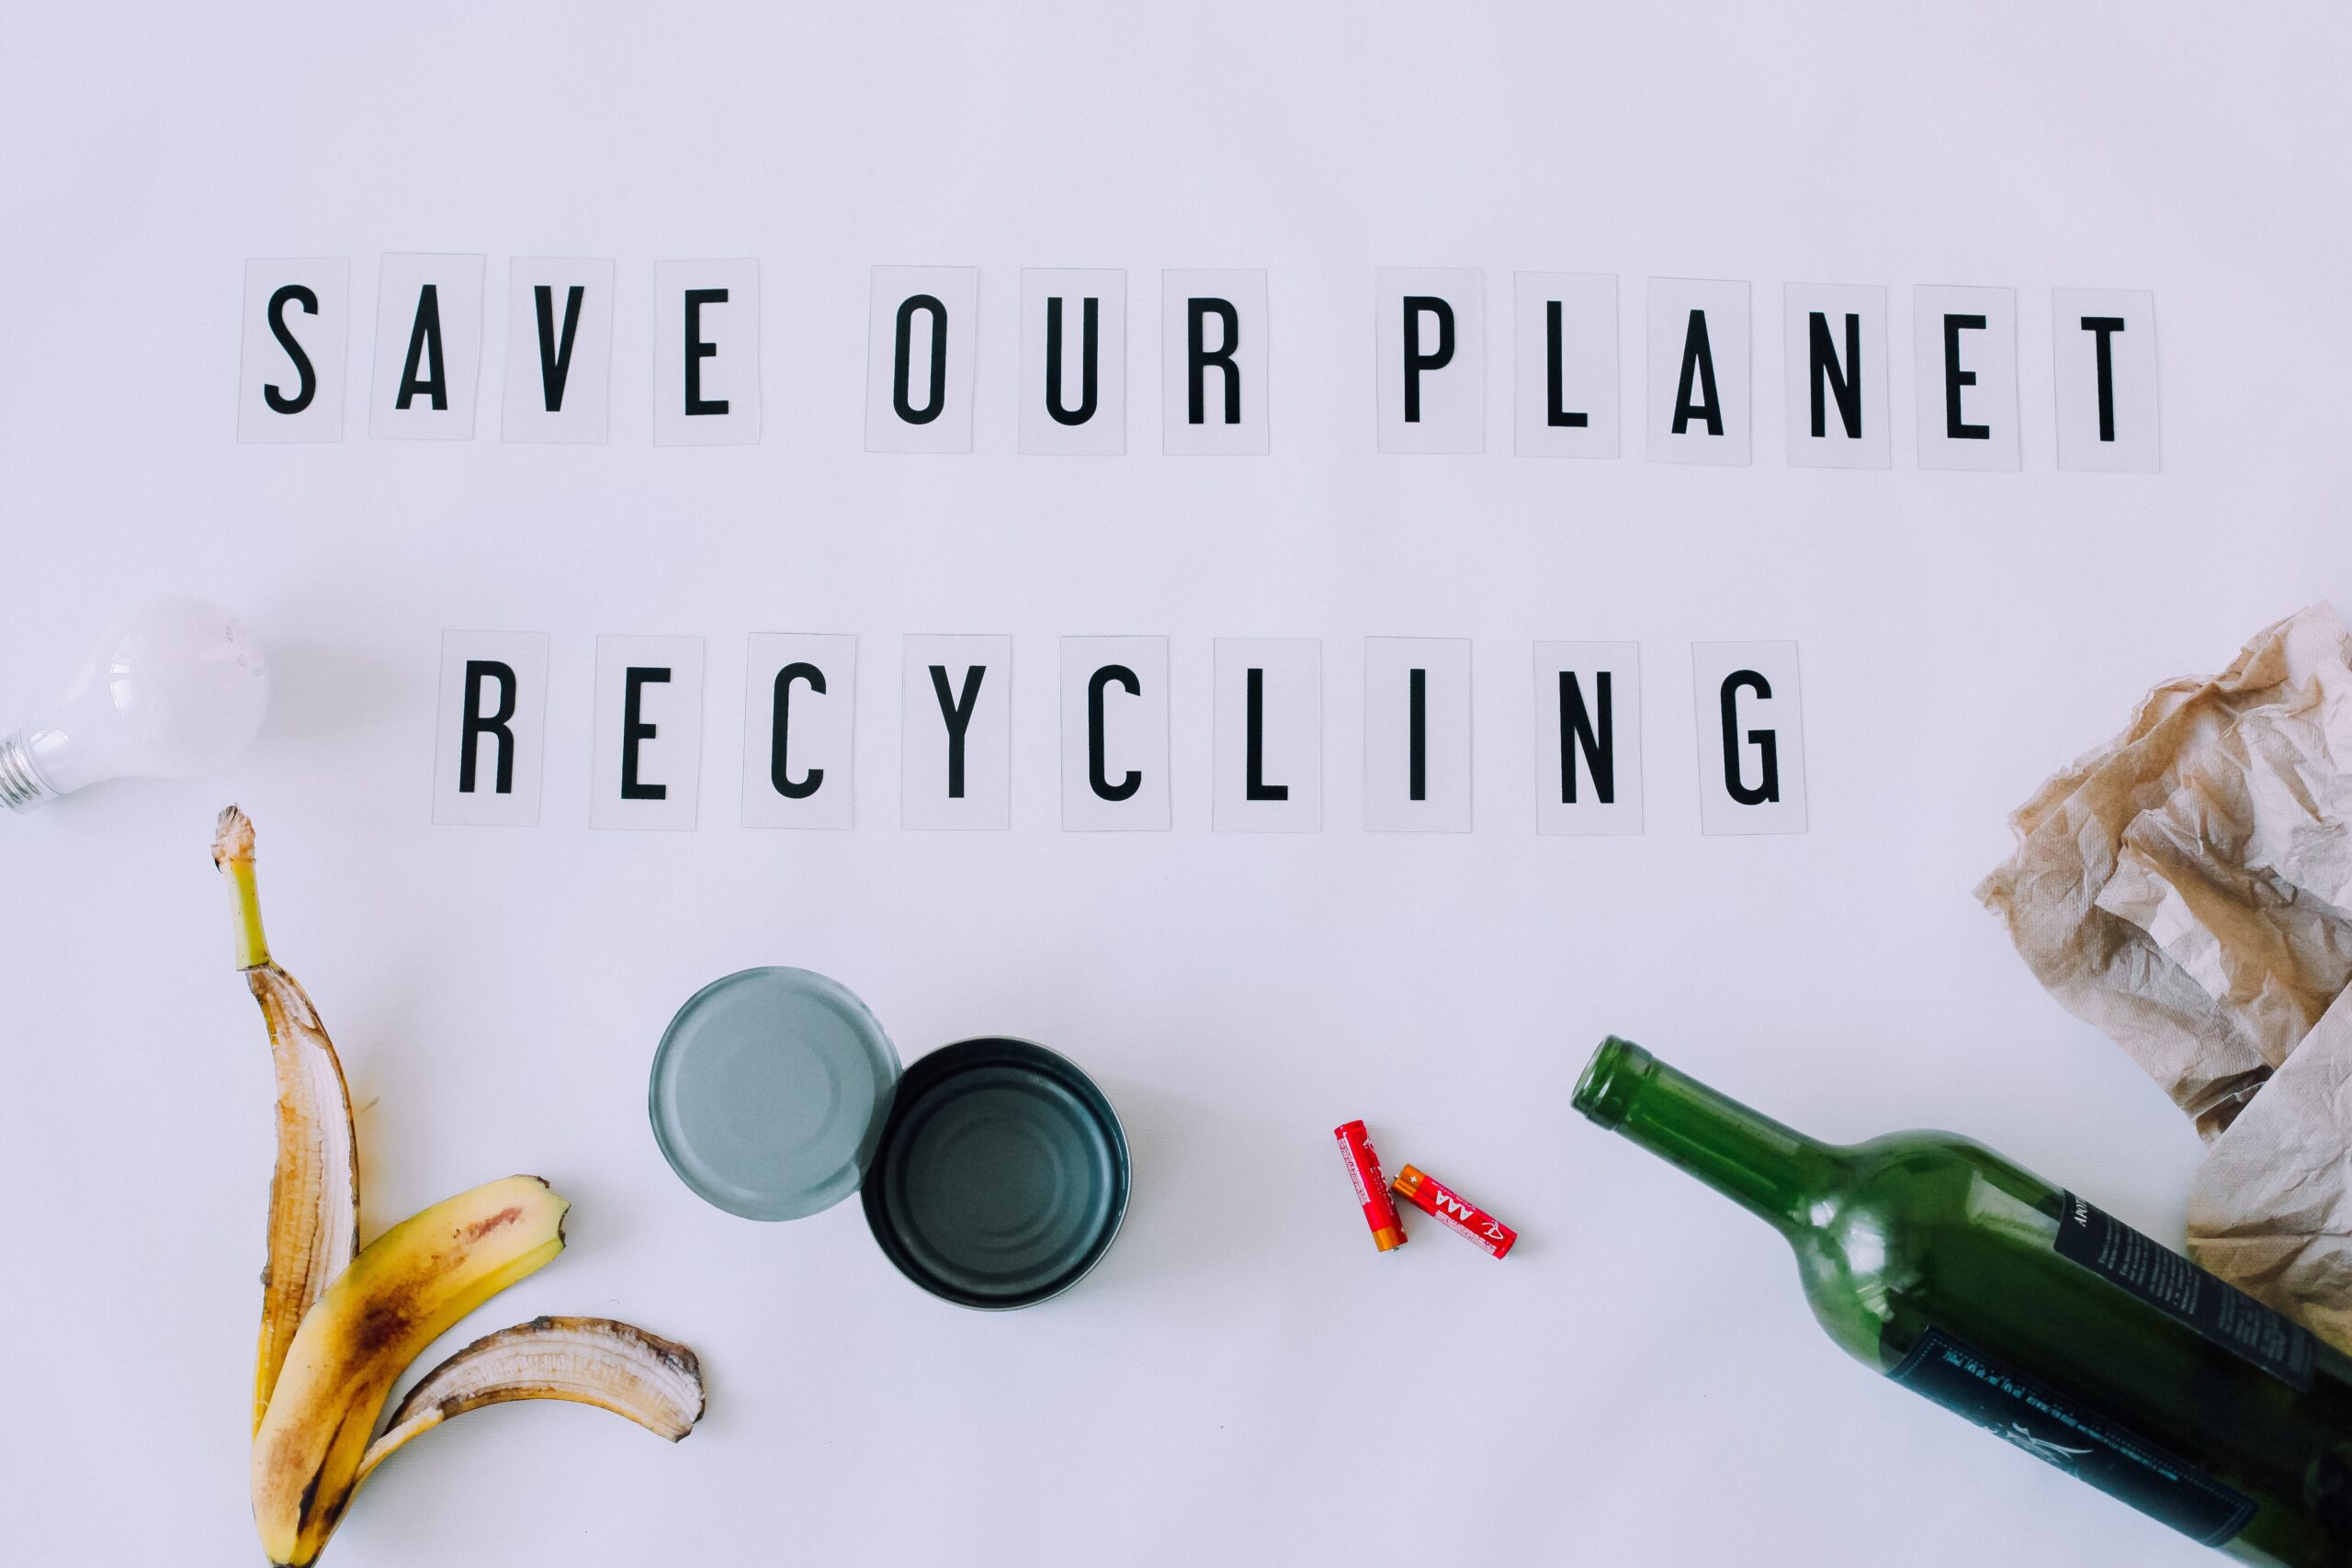 Save our planet and recycle text on white background with recyclable items